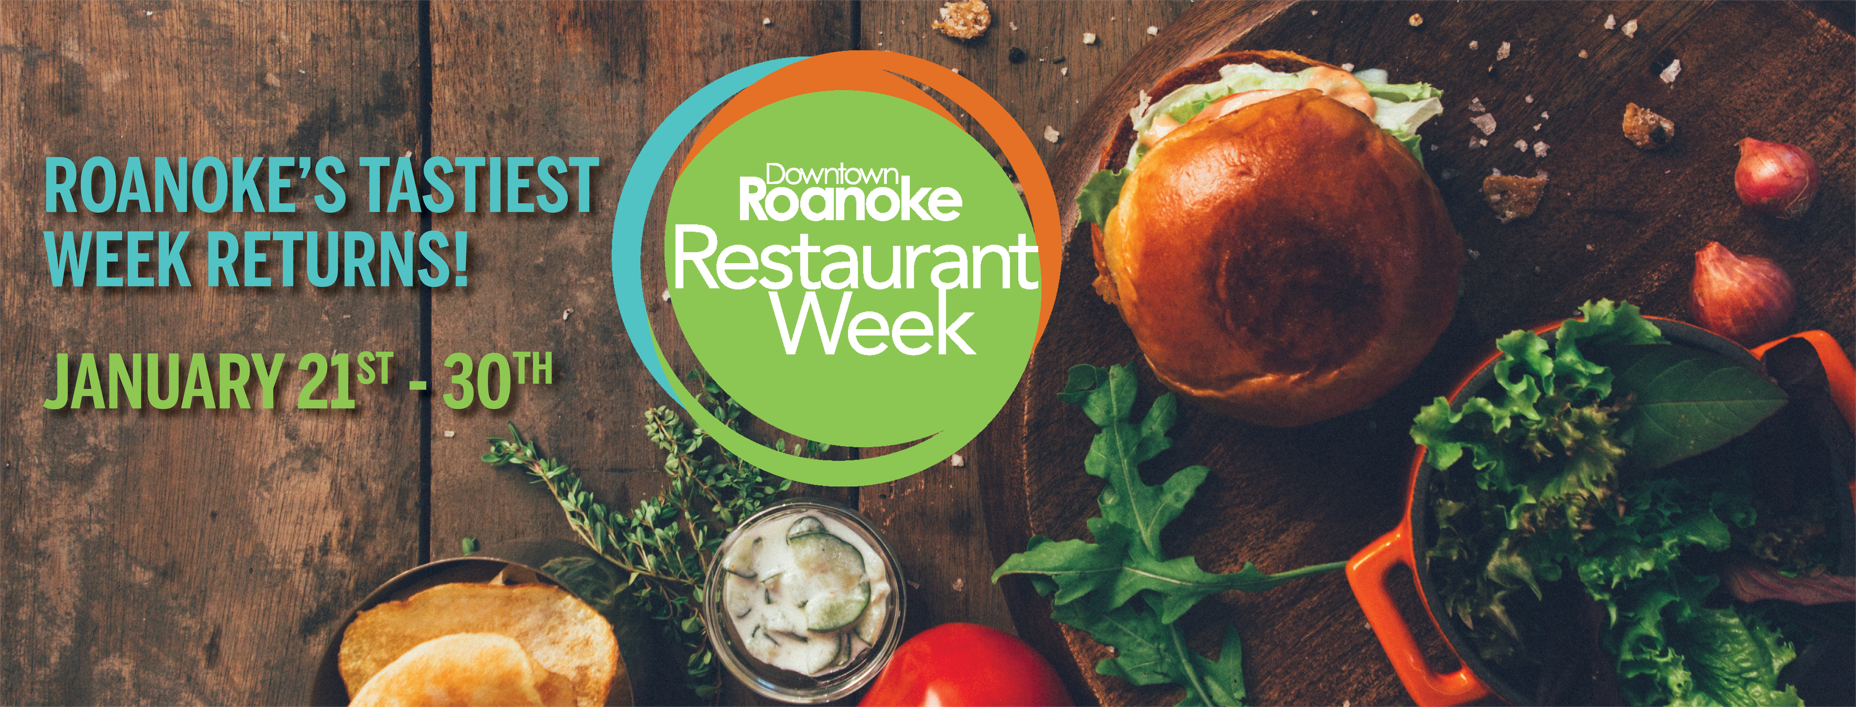 https://www.downtownroanoke.org/events/signature-events/restaurant-week